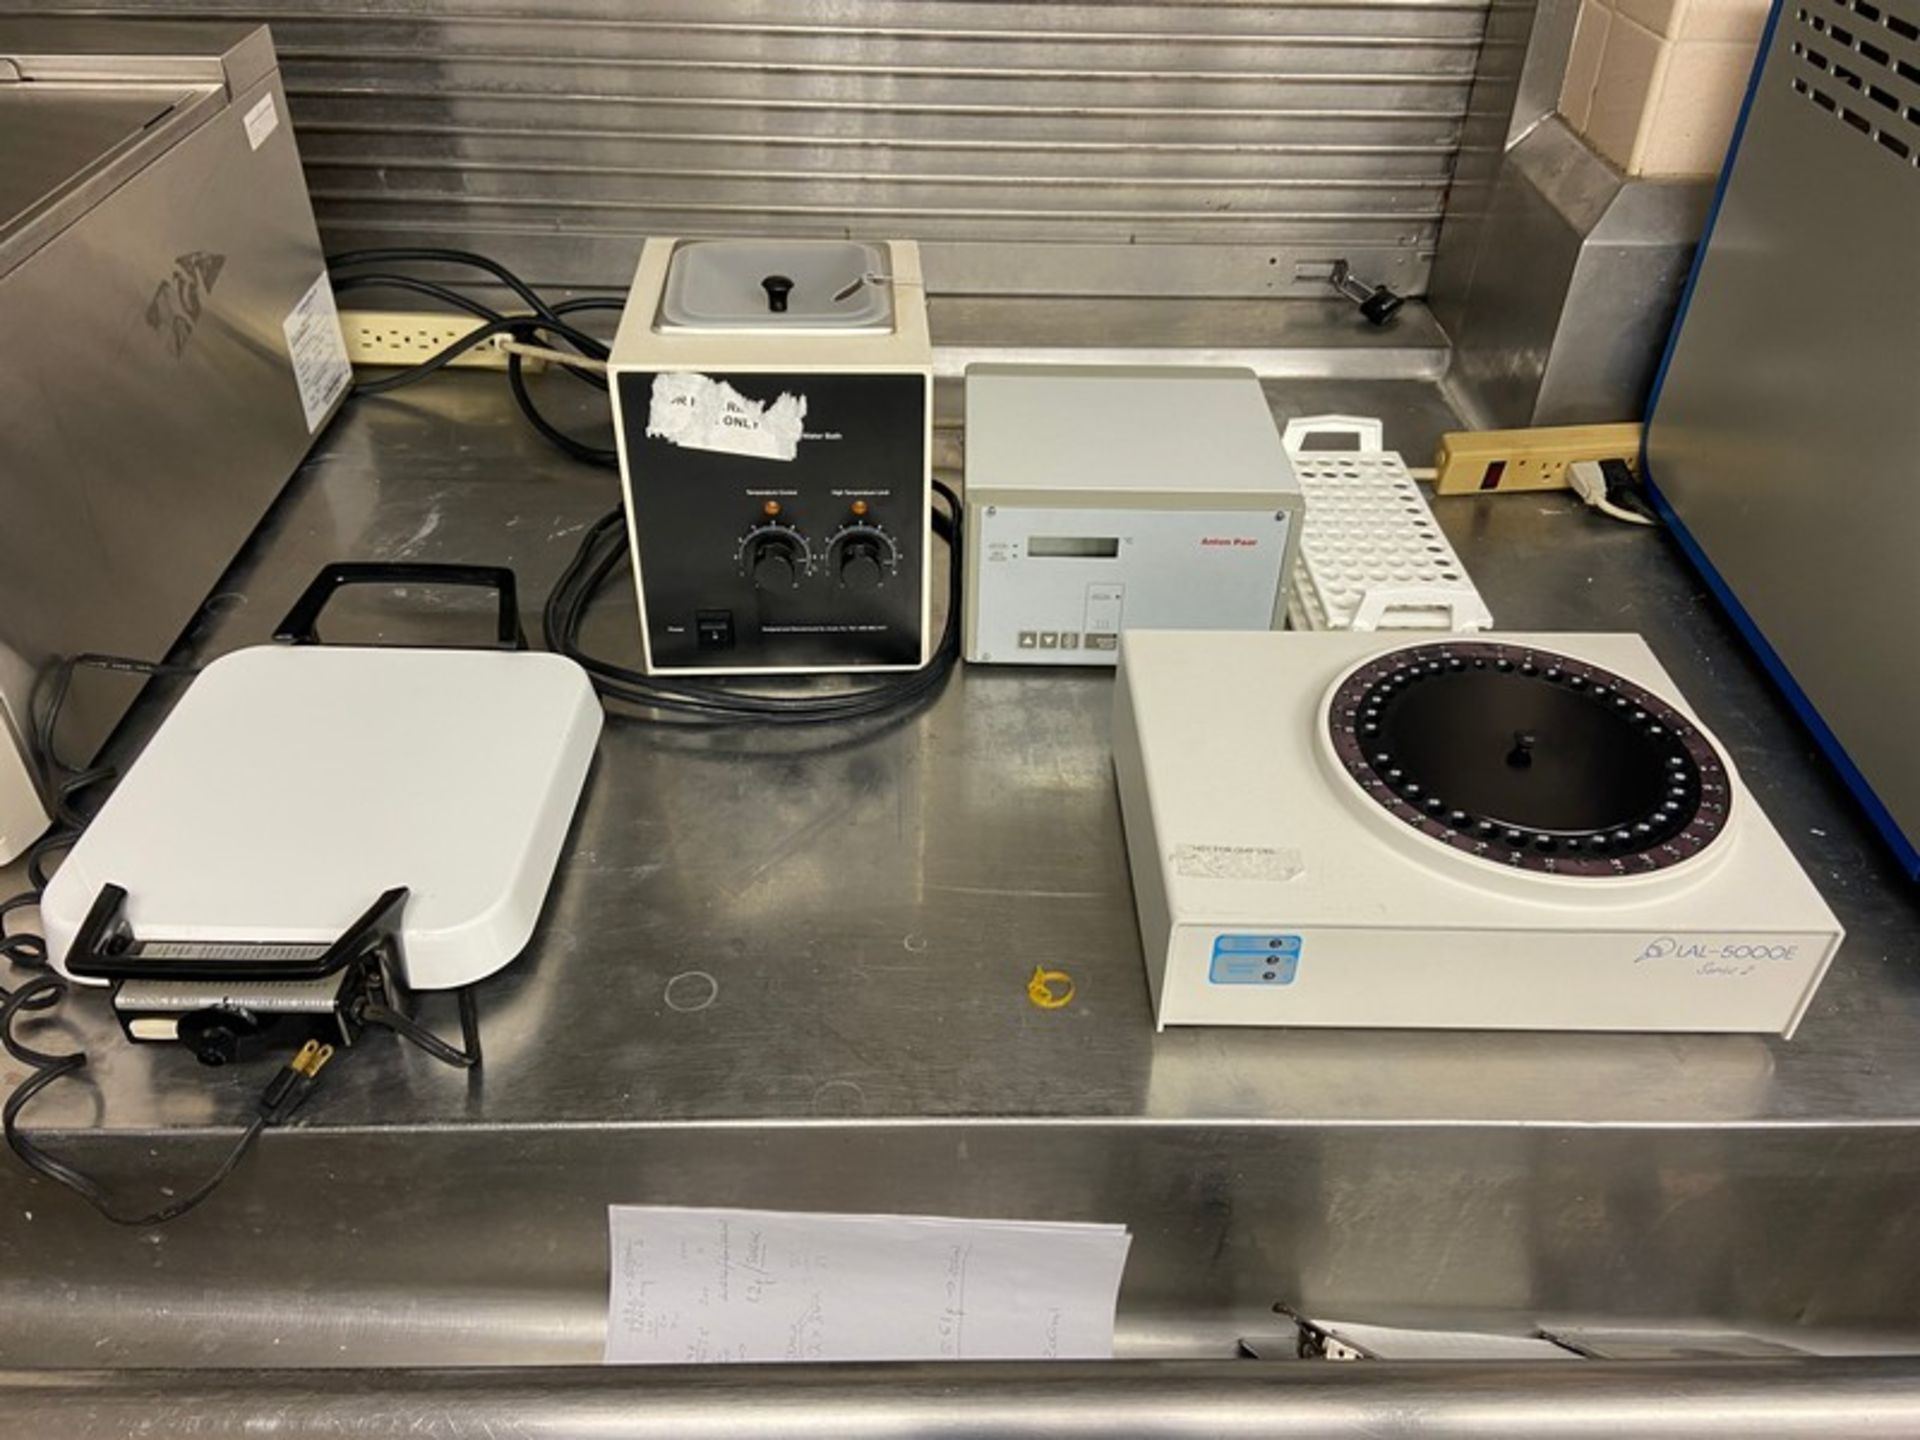 Lot of Assorted (5) Pce. Lab Equipment, Includes Plastic Test Tube Racks, LAL-5000E, Hot Plate,-